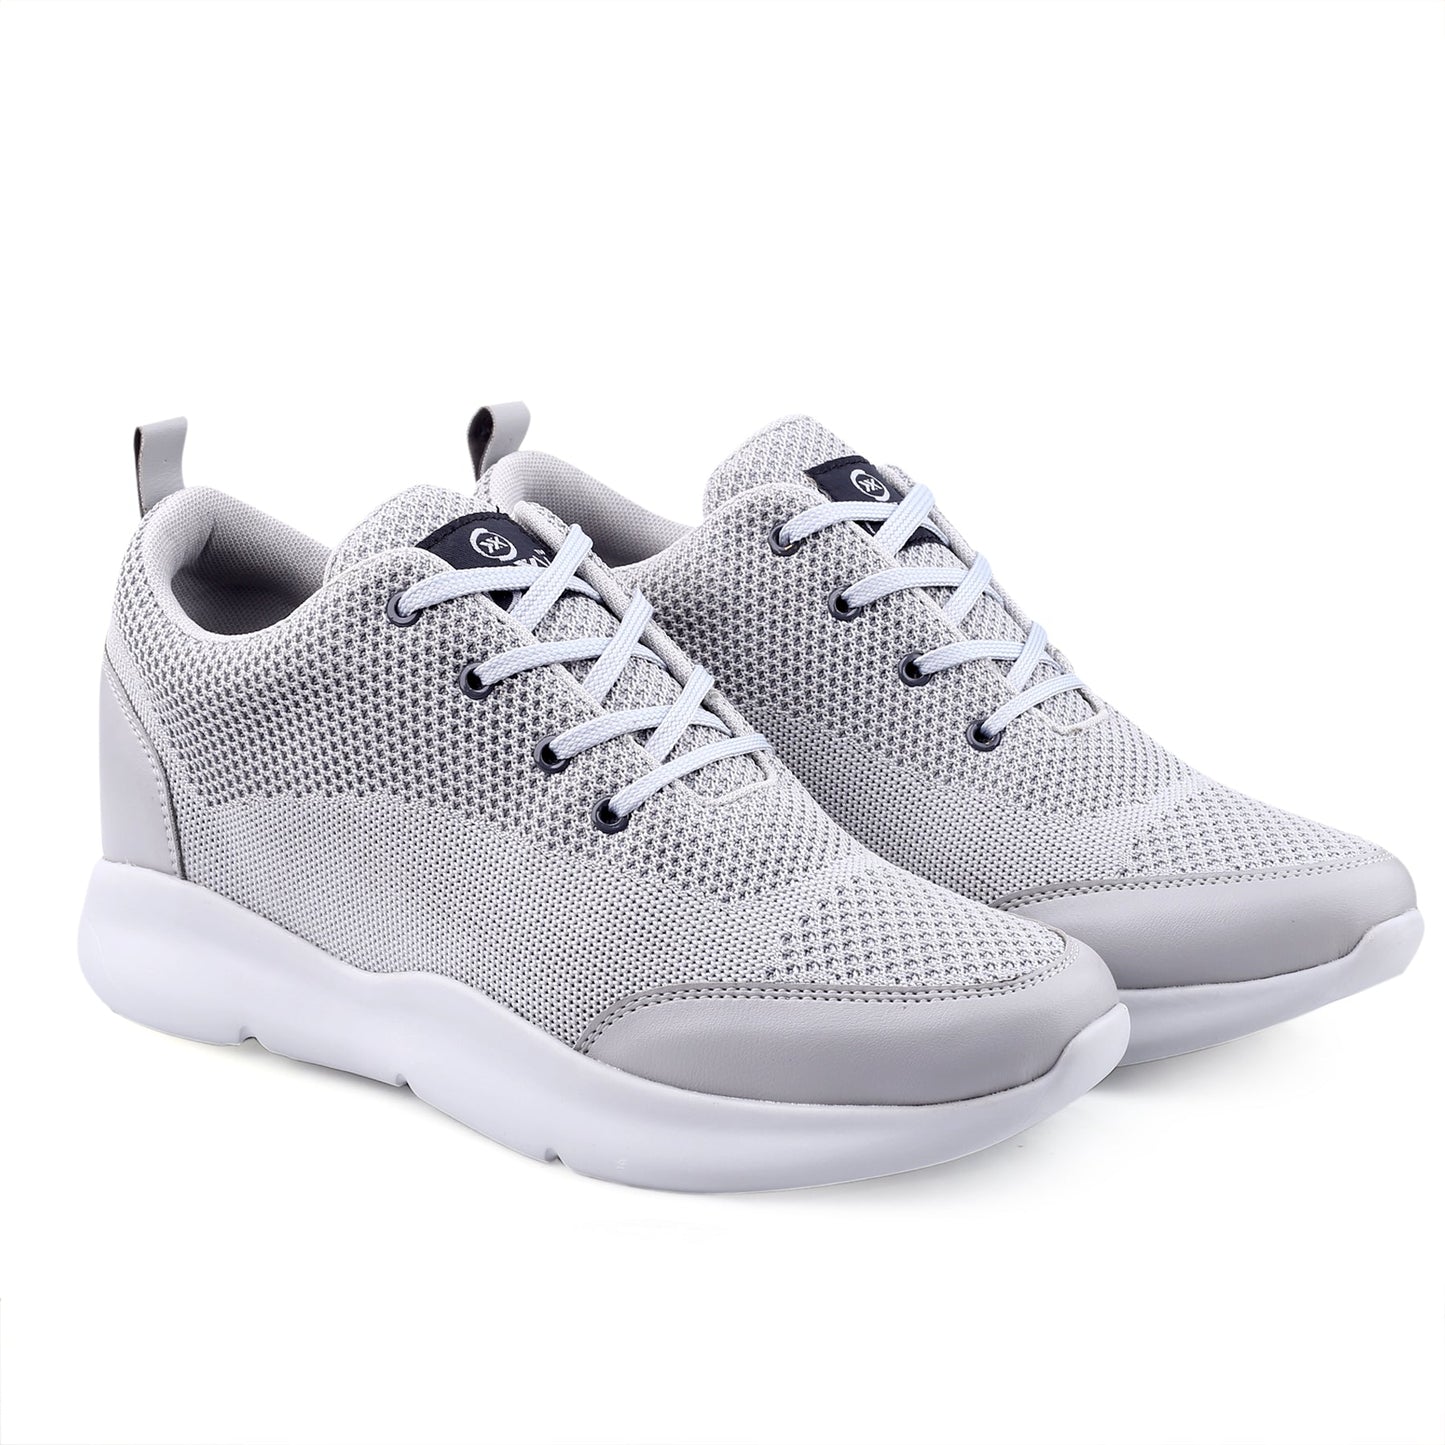 Men's Stylish Casual Sports Lace-Up Shoes